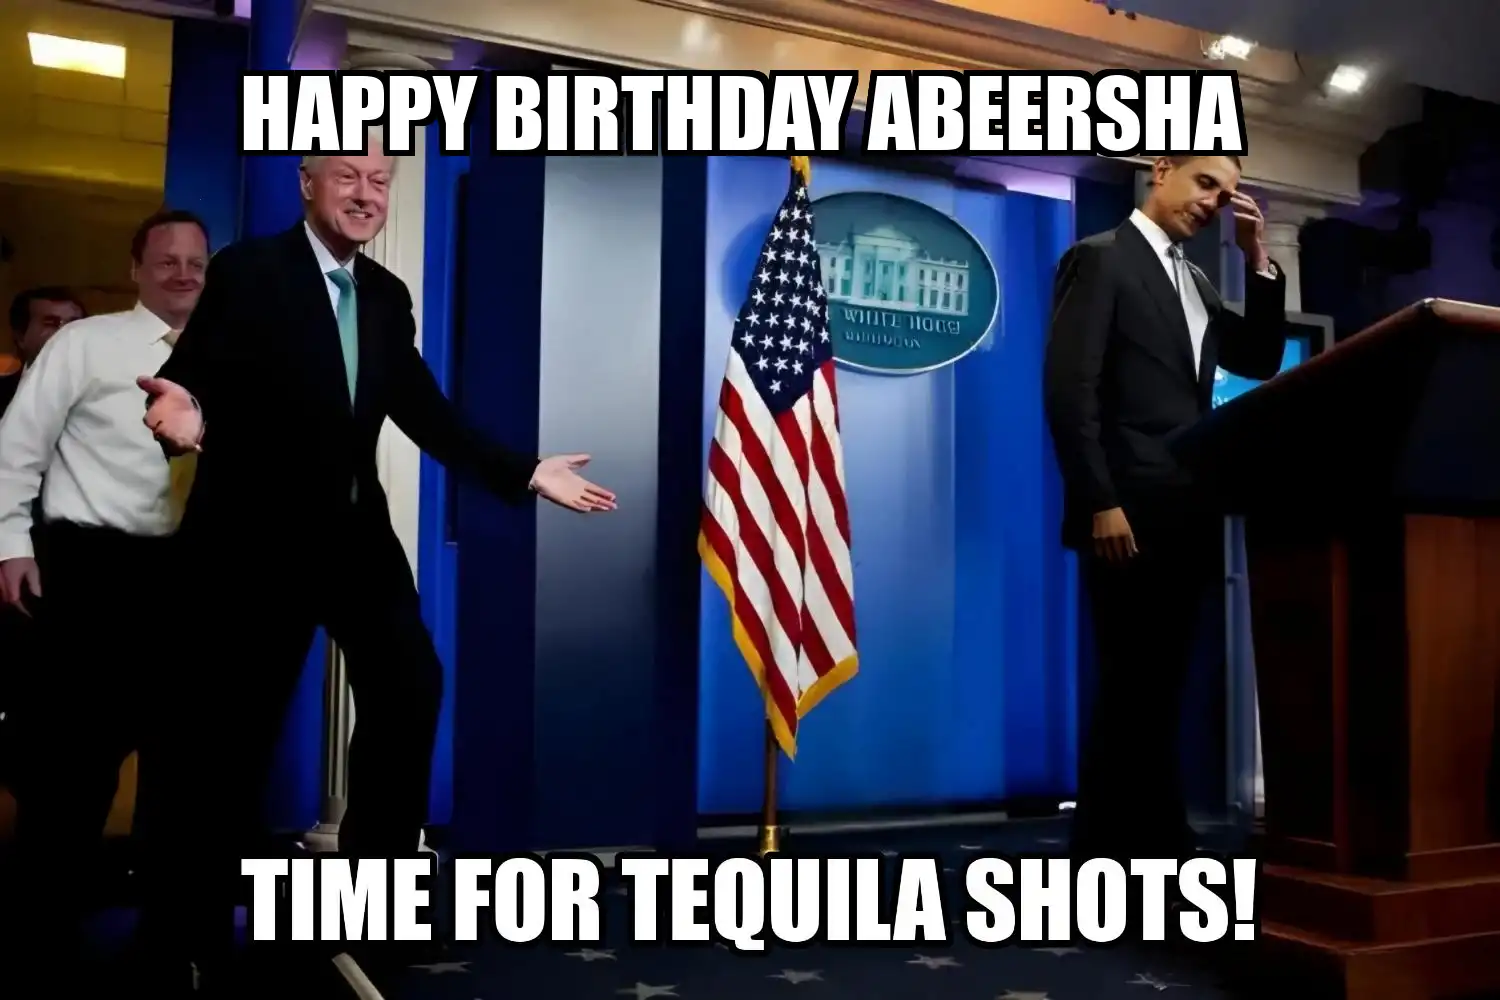 Happy Birthday Abeersha Time For Tequila Shots Memes